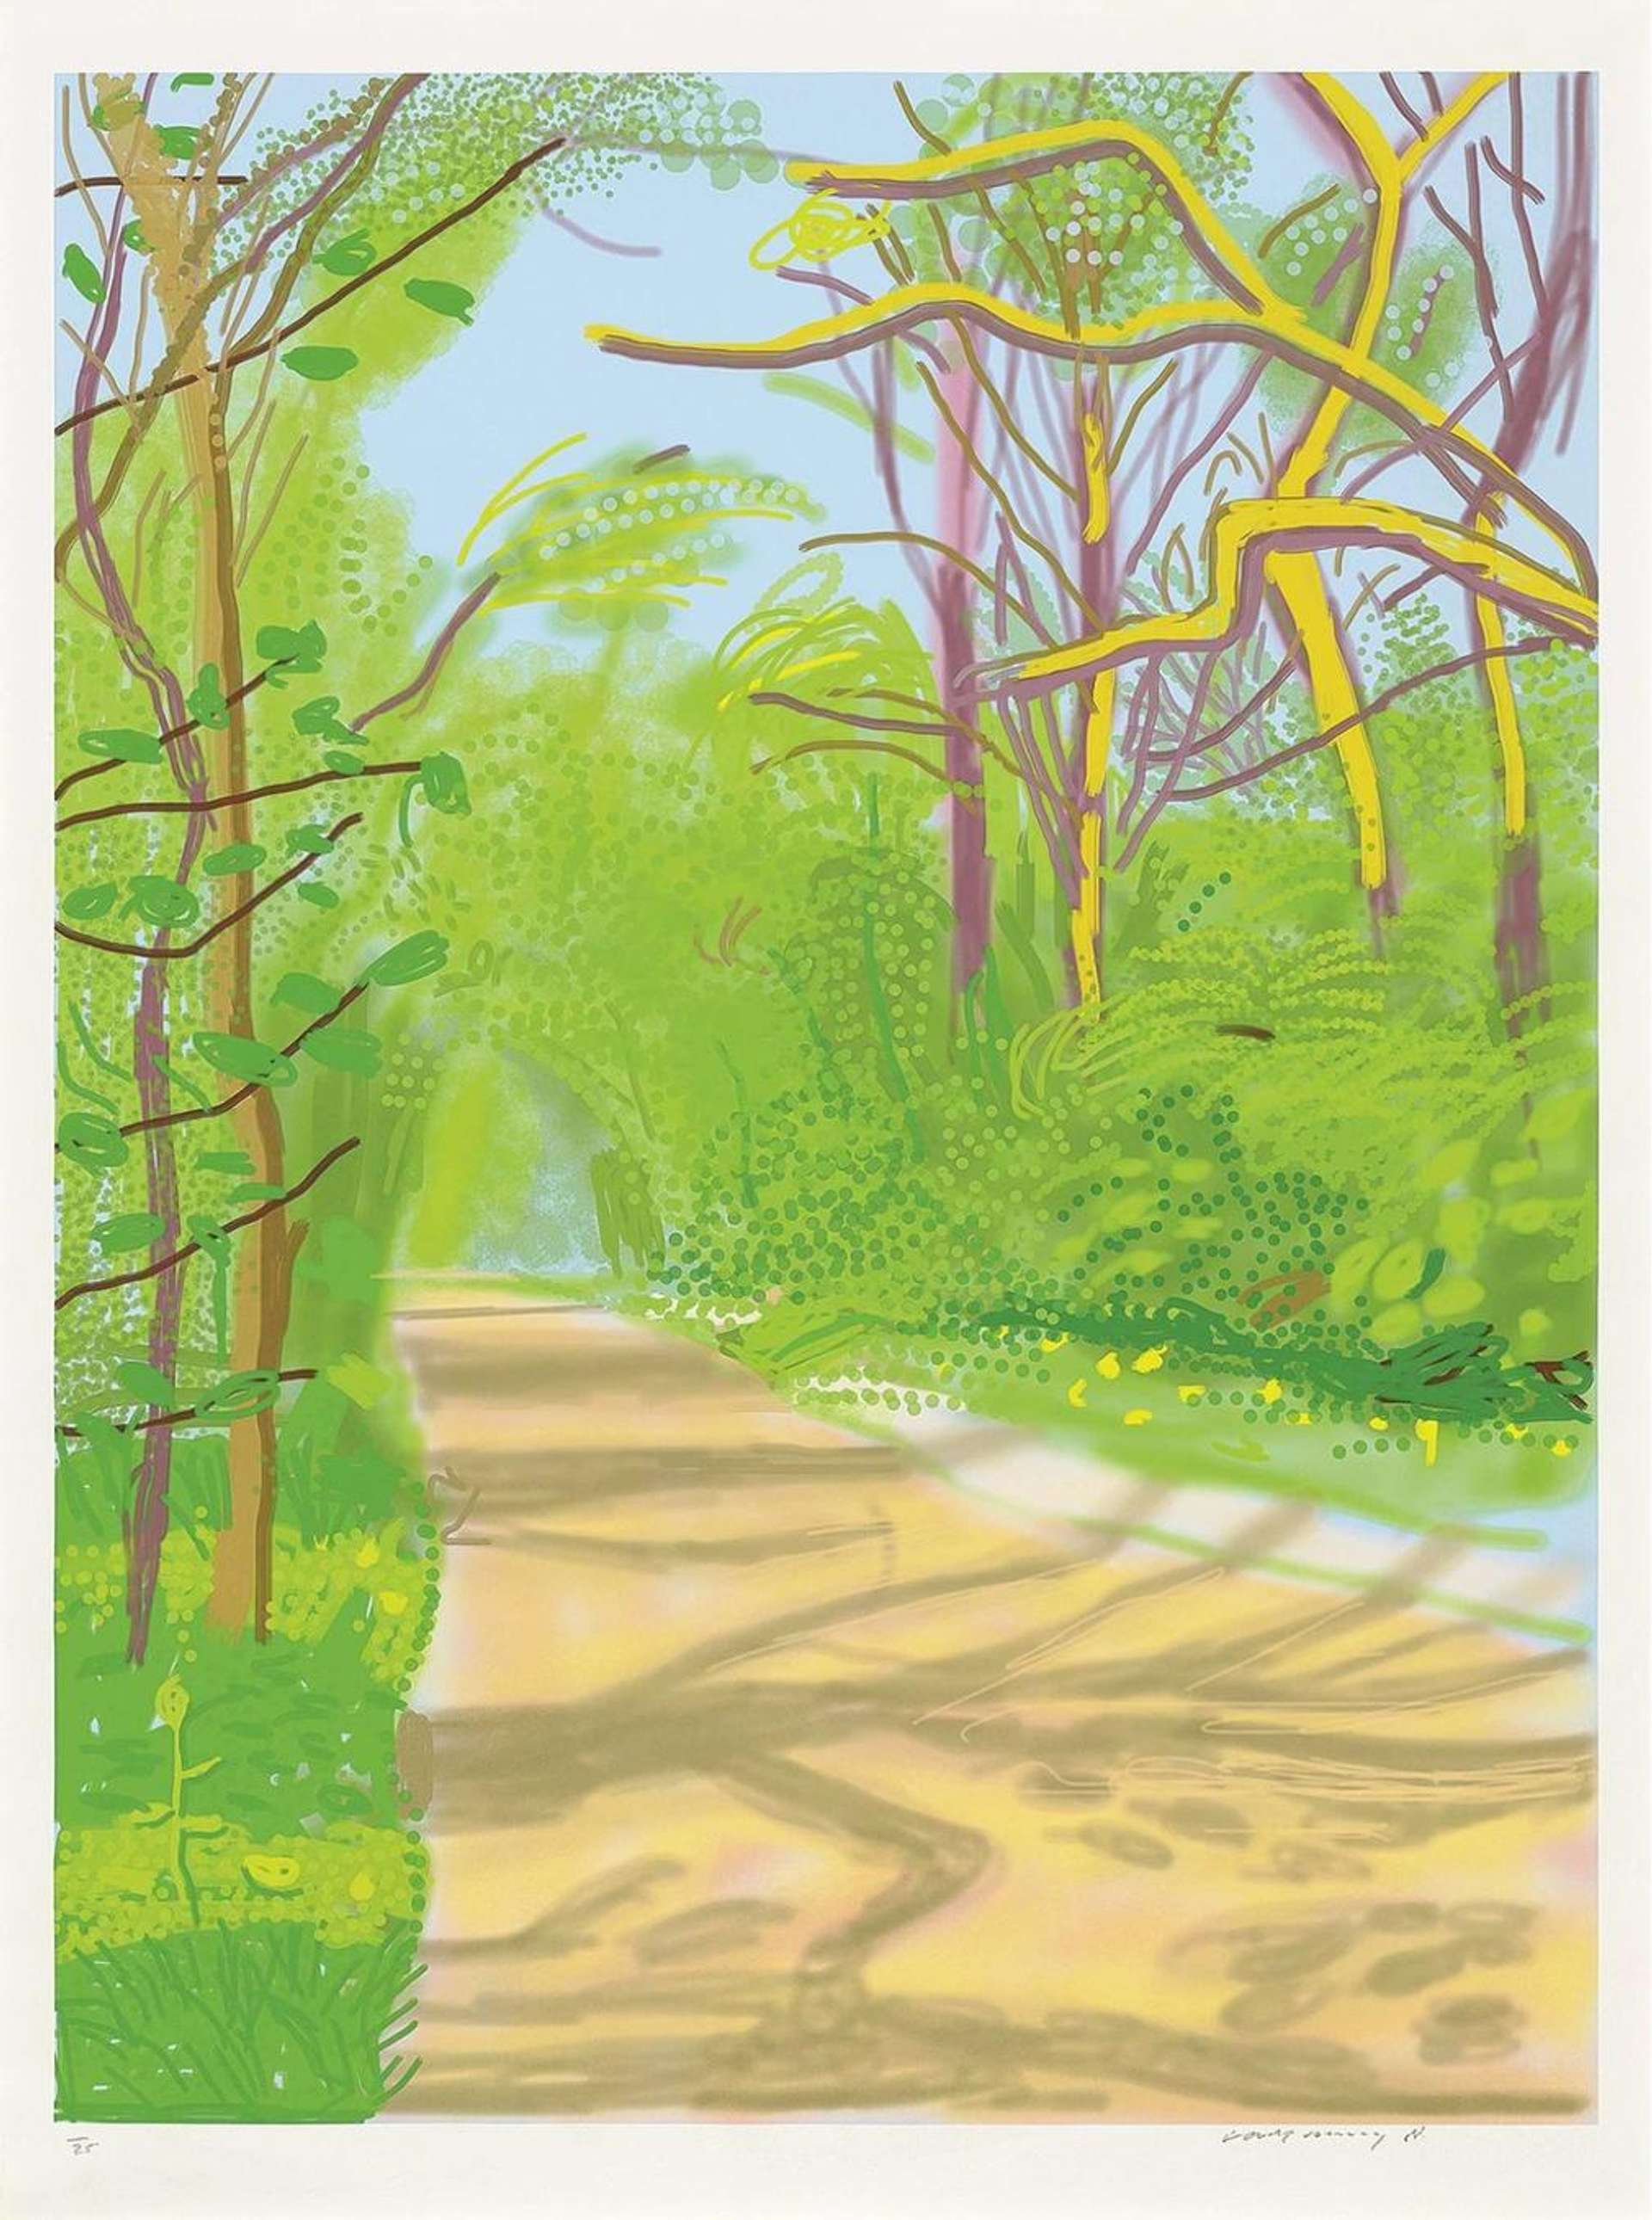 The Arrival Of Spring In Woldgate East Yorkshire 25th April 2011 by David Hockney 